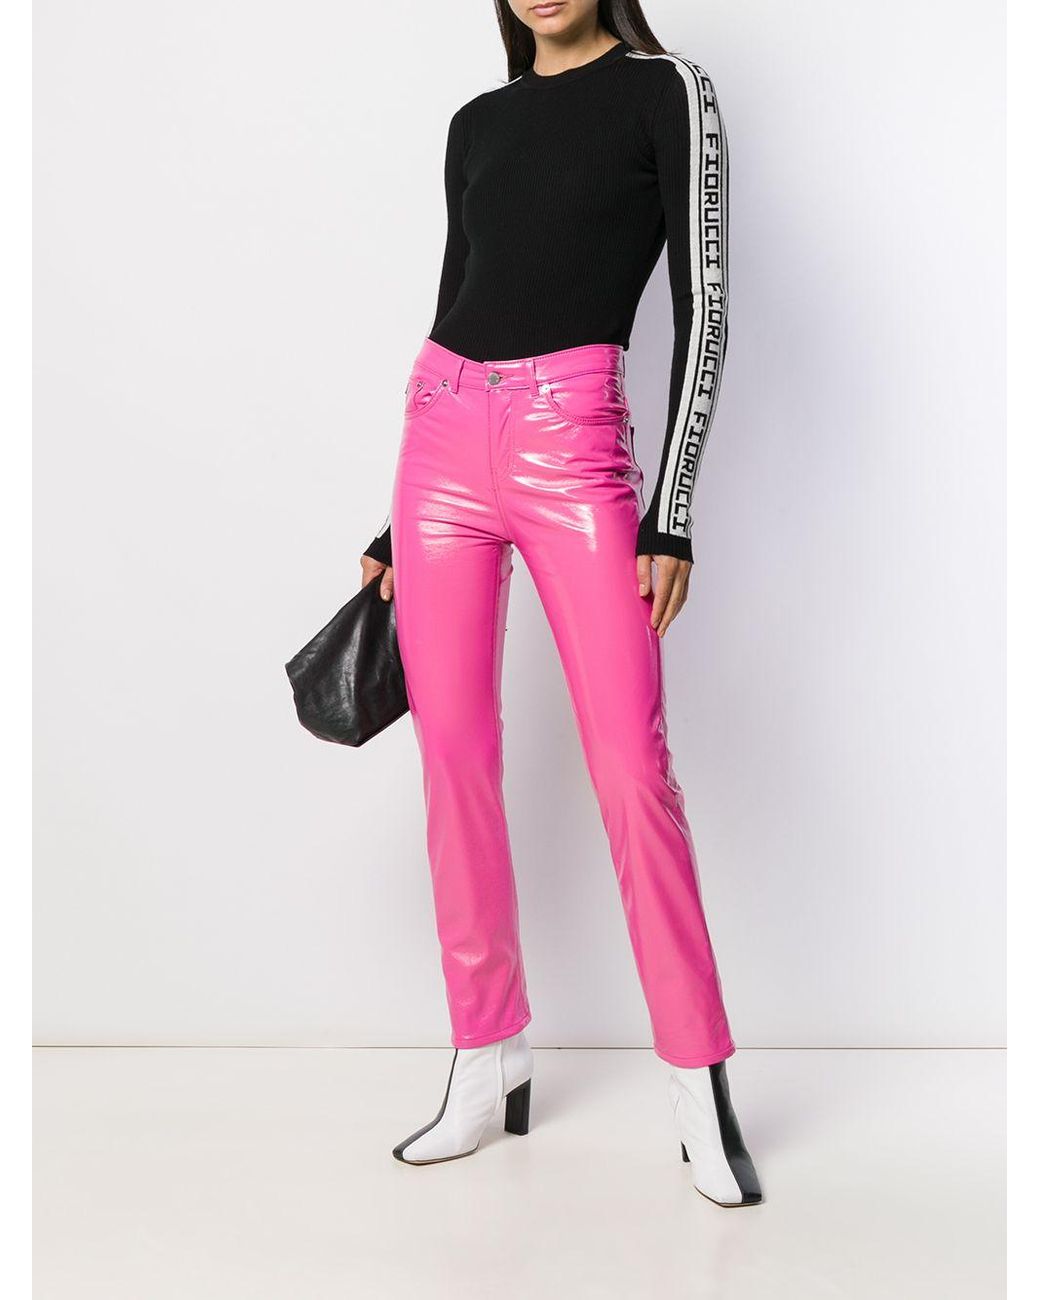 Fiorucci Yves Vinyl Trousers in Pink | Lyst